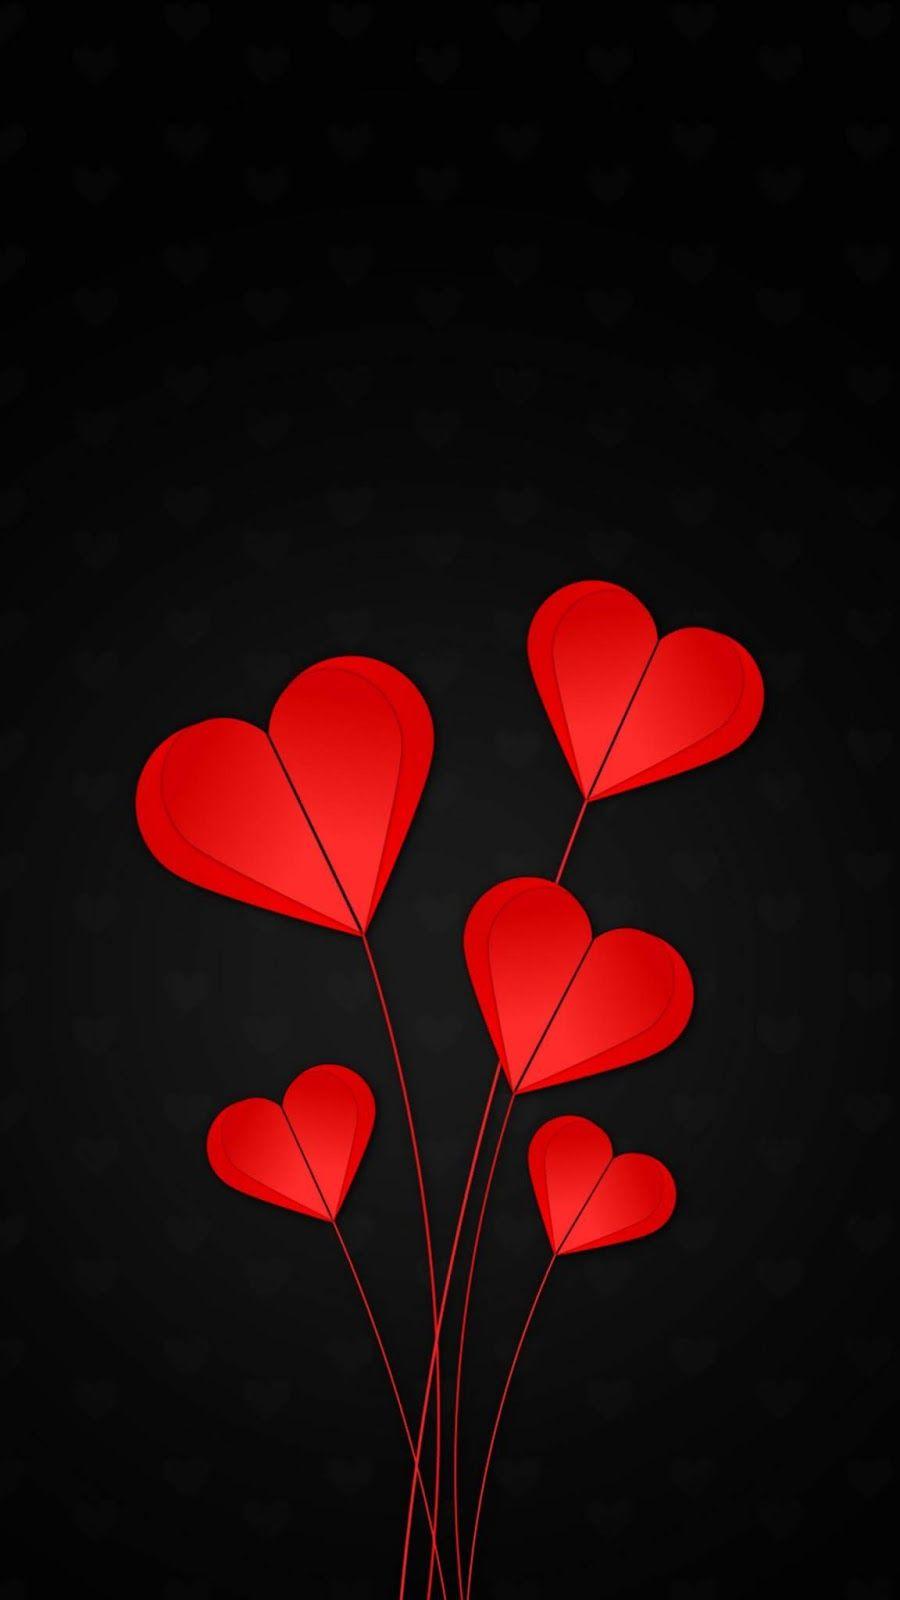 hearts, red, black background. Heart iphone wallpaper, Heart wallpaper, Red and black background